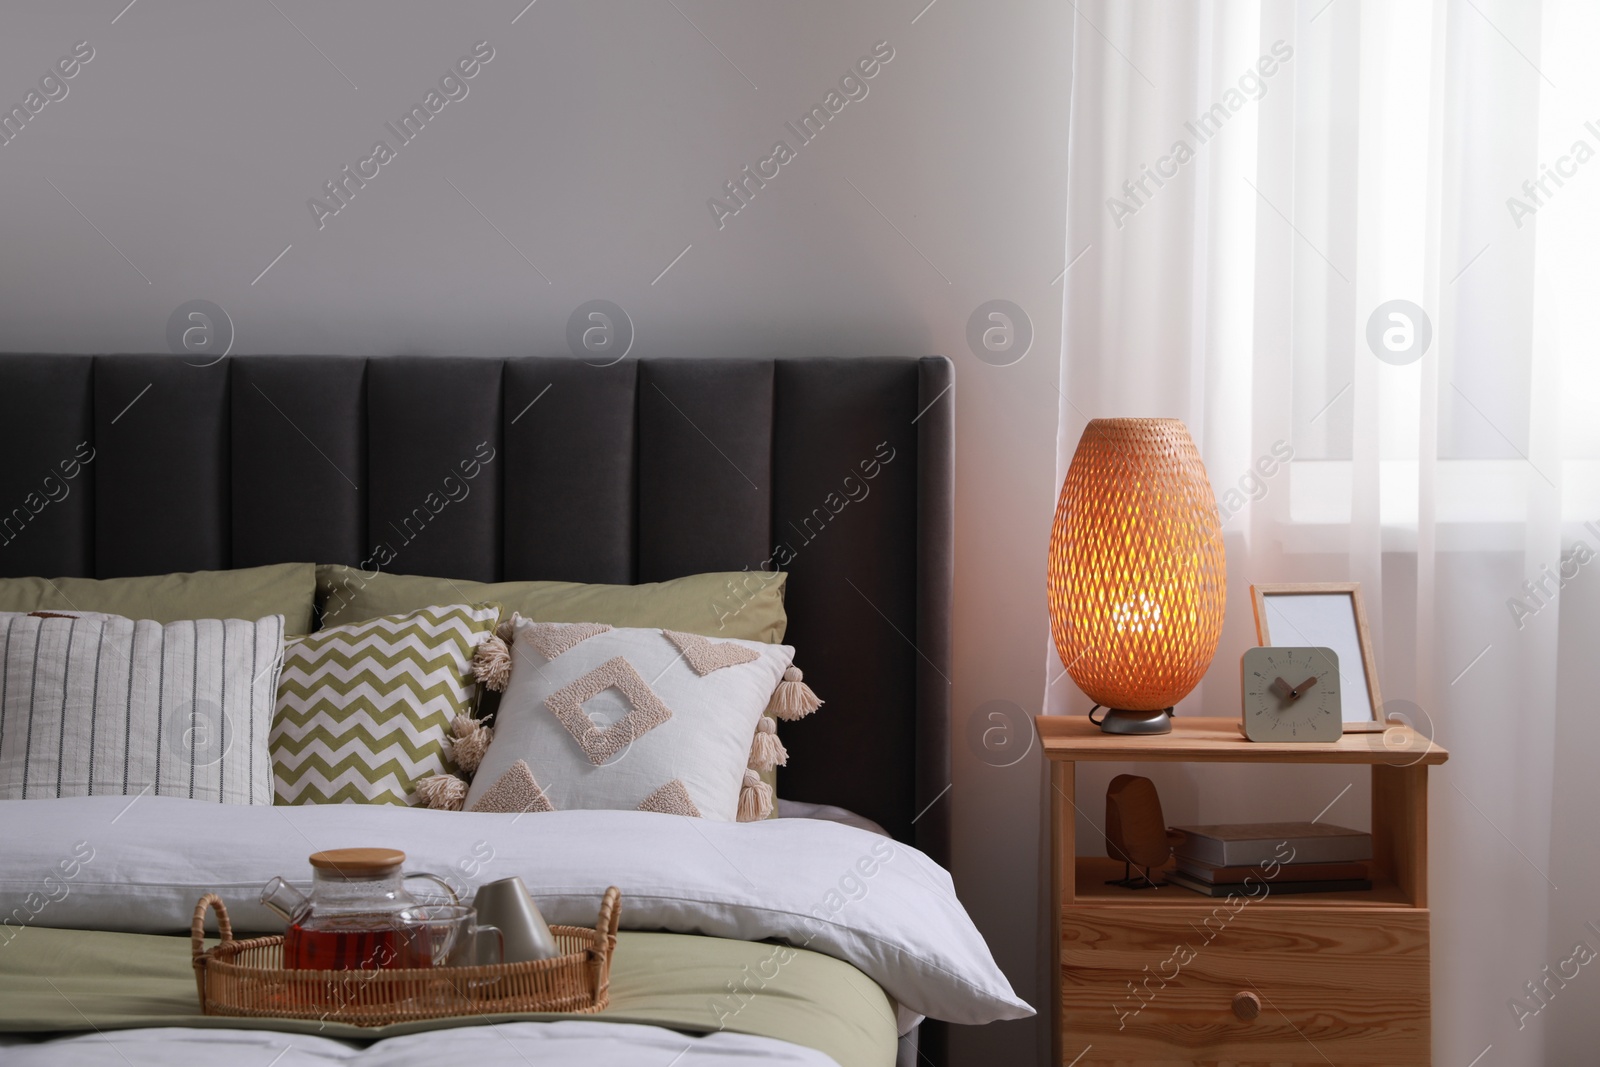 Photo of Wicker tray with teapot on comfortable bed, lamp and different decor on wooden bedside table in room. Stylish interior